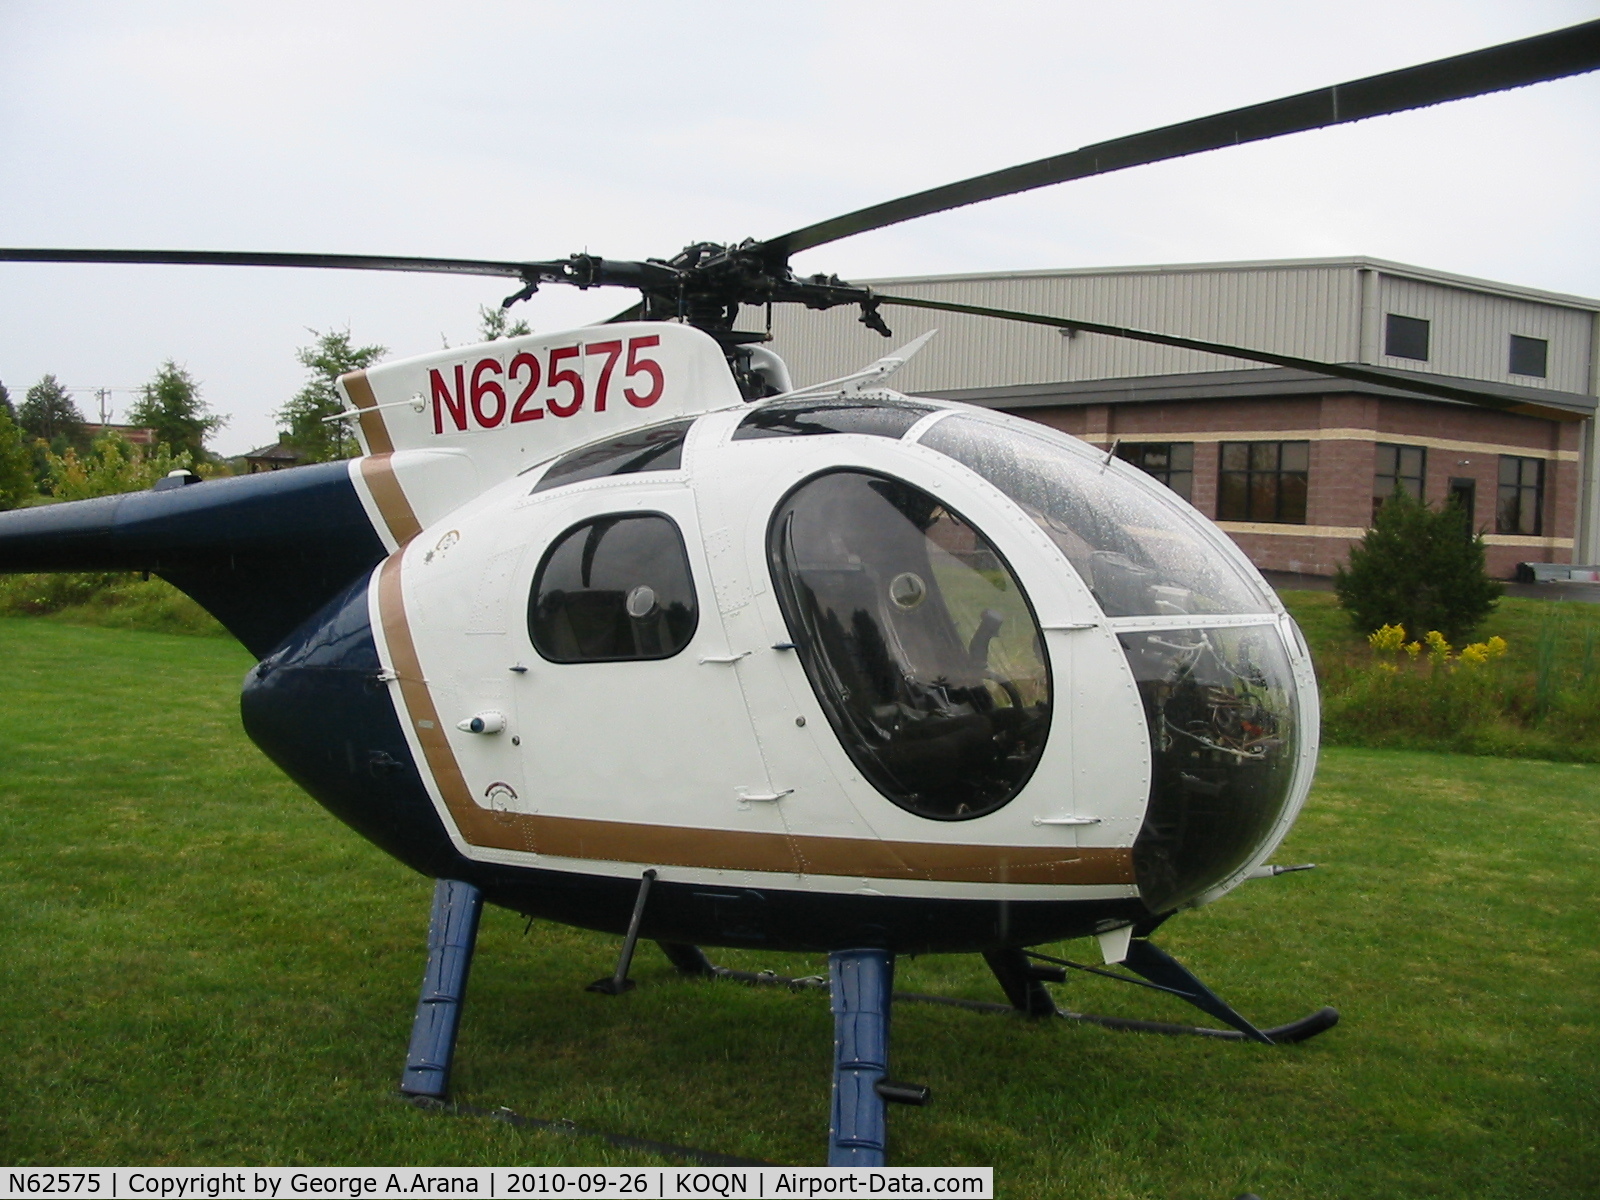 N62575, 1968 Hughes OH-6A Cayuse C/N 0497, Starboard front view